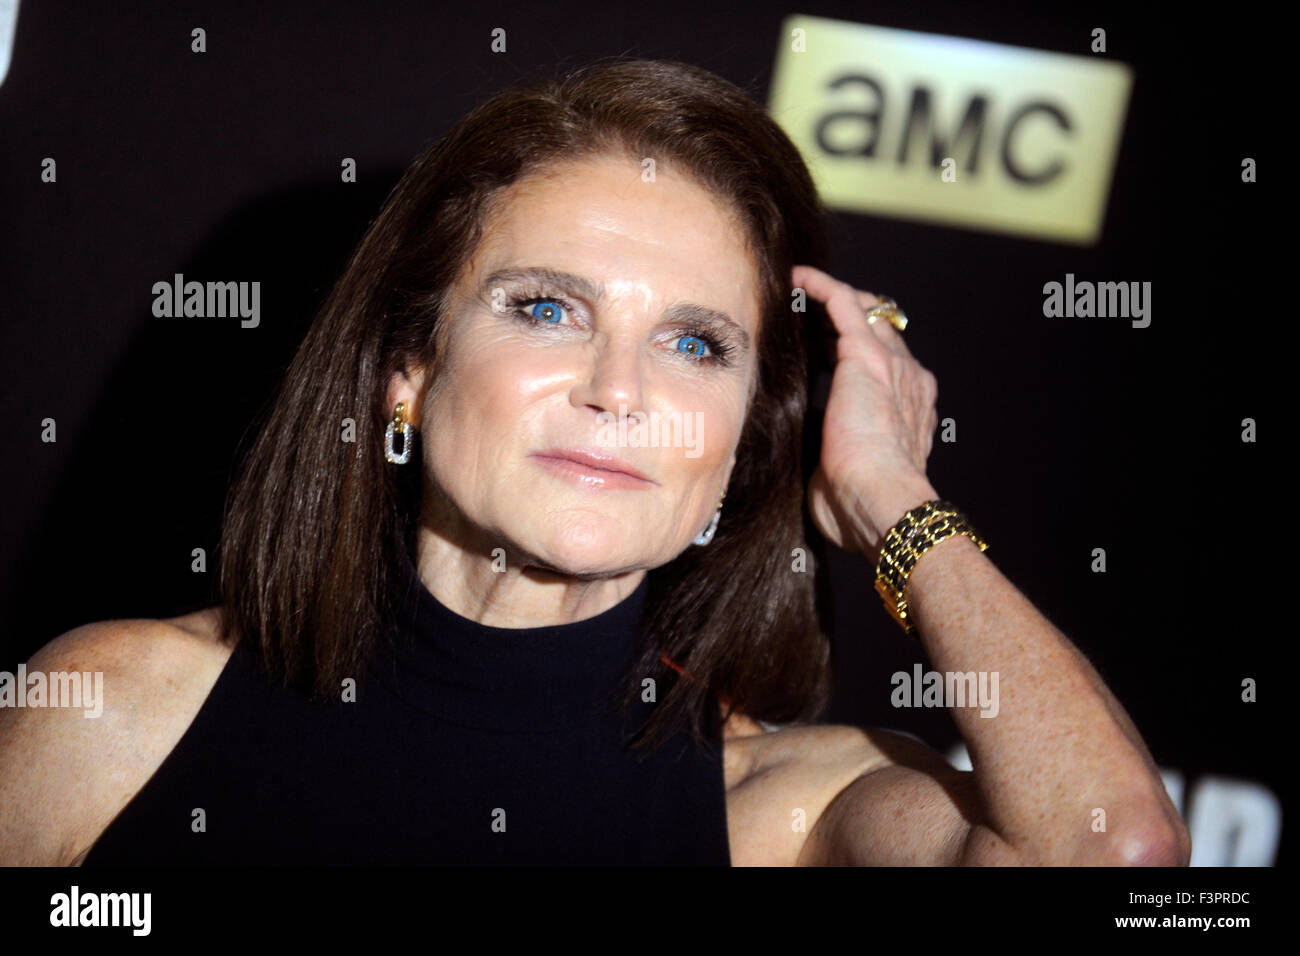 New York City. 9th Oct, 2015. Tovah Feldshuh attends AMC's 'The Walking Dead' Season 6 Fan Premiere Event 2015 at Madison Square Garden on October 9, 2015 in New York City. © dpa/Alamy Live News Stock Photo